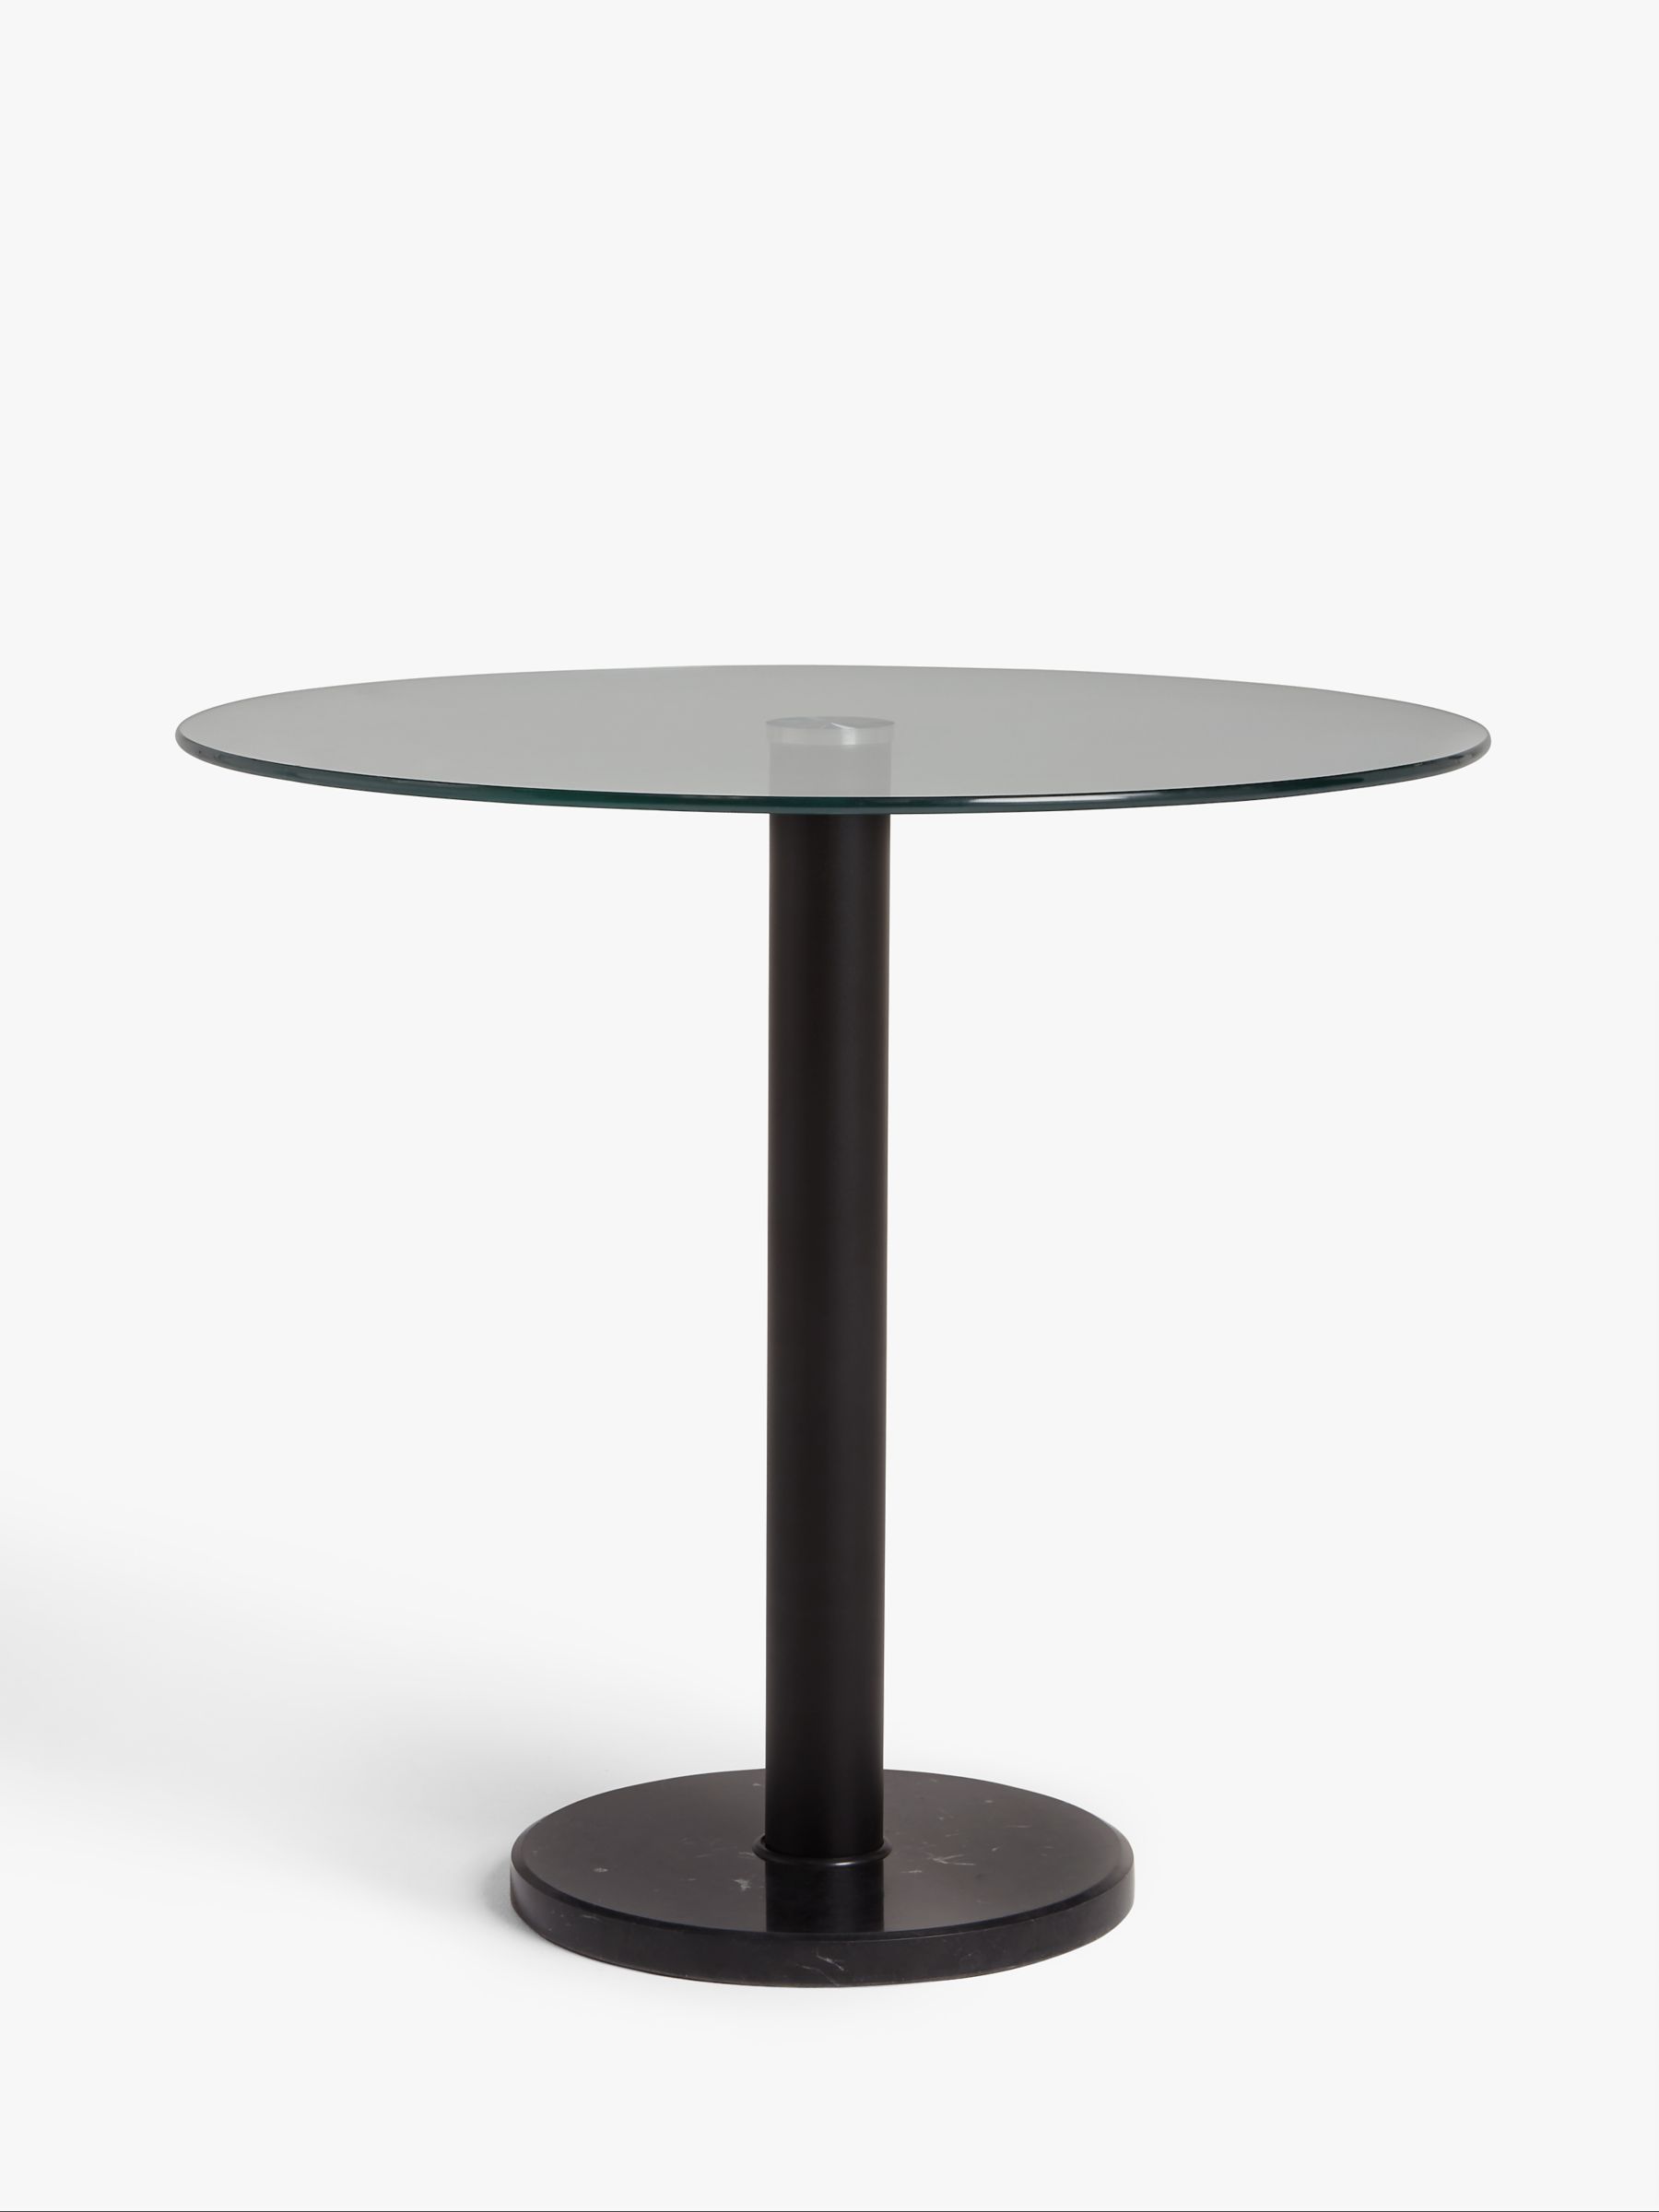 Photo of John lewis anyday enzo 2 seater glass round dining table black marble